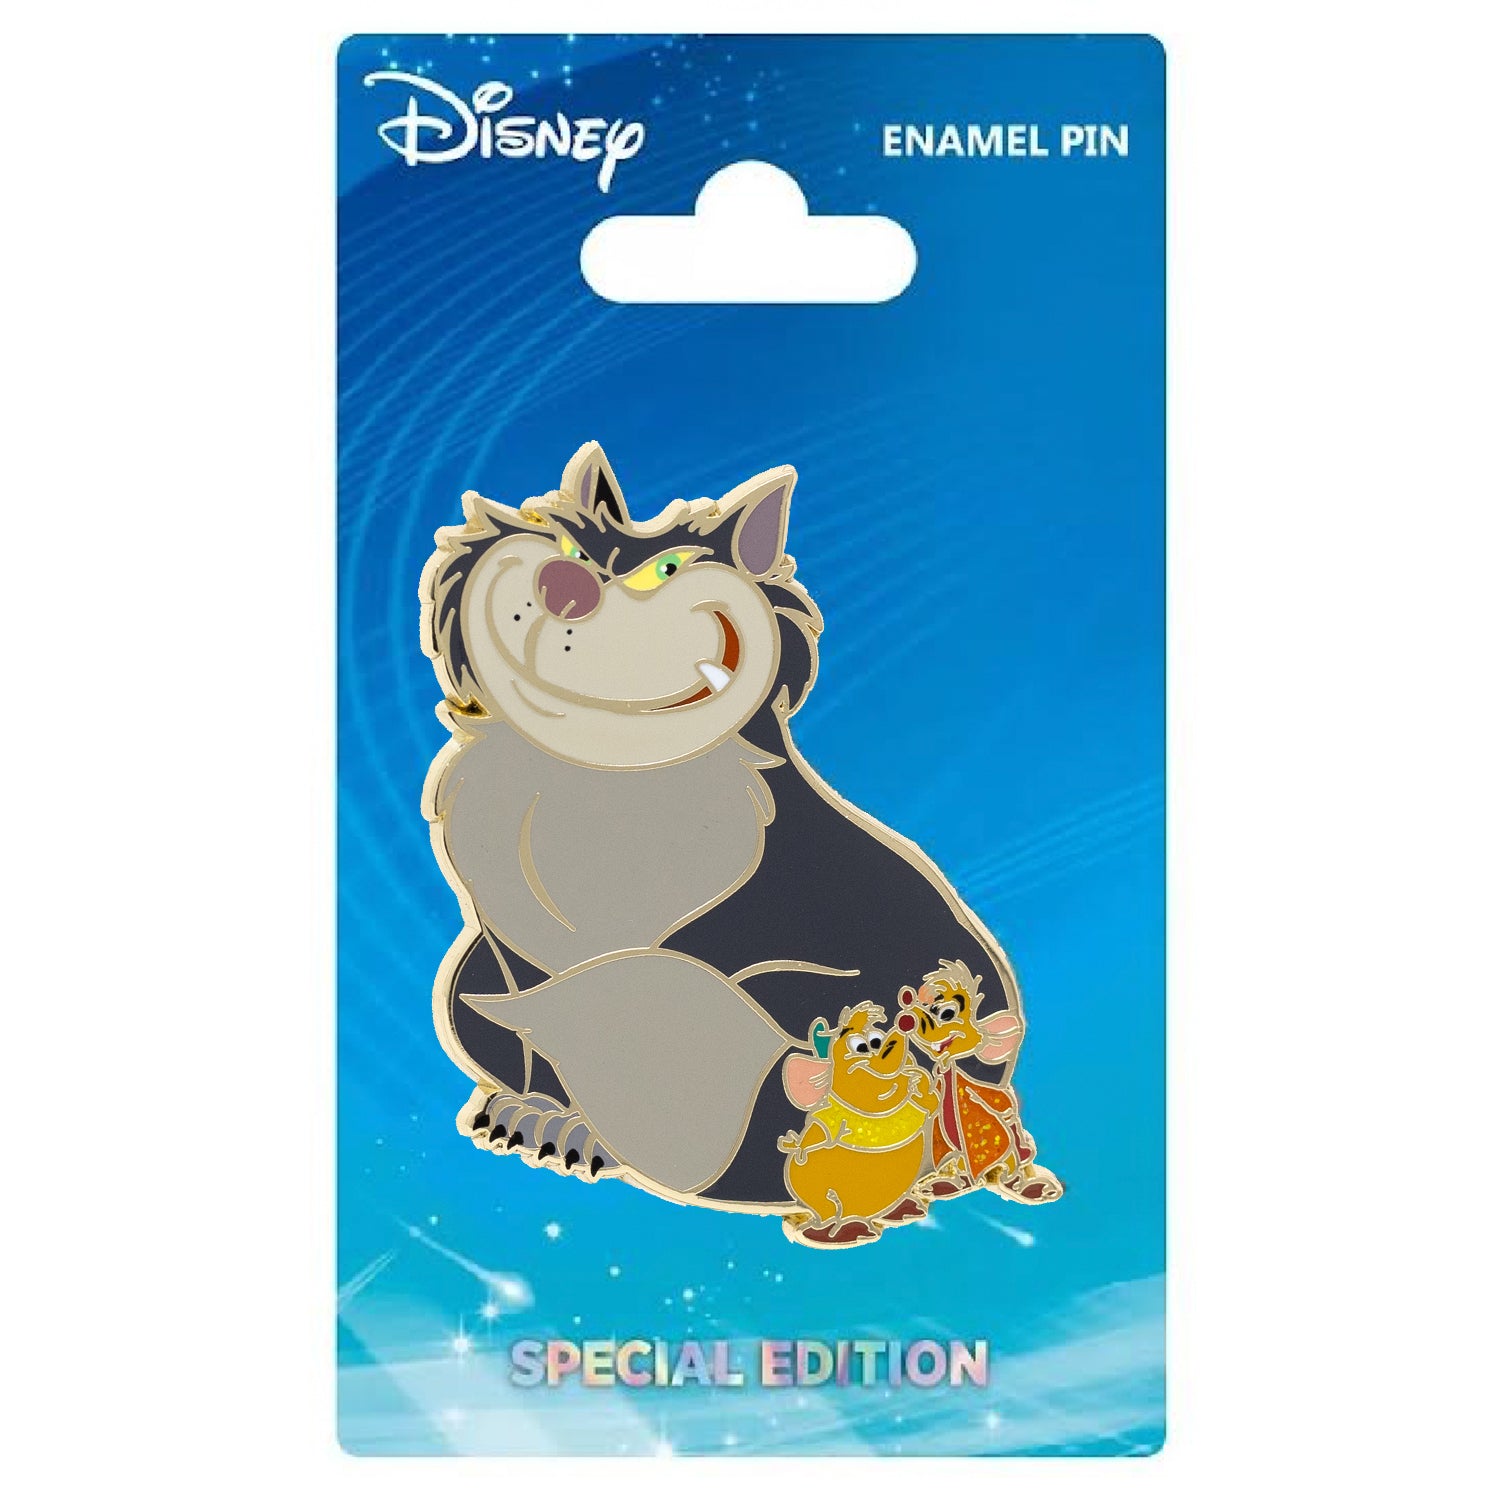 Disney Lucifer, Jaq and Gus Remy Special Edition 500 Pin - NEW RELEASE